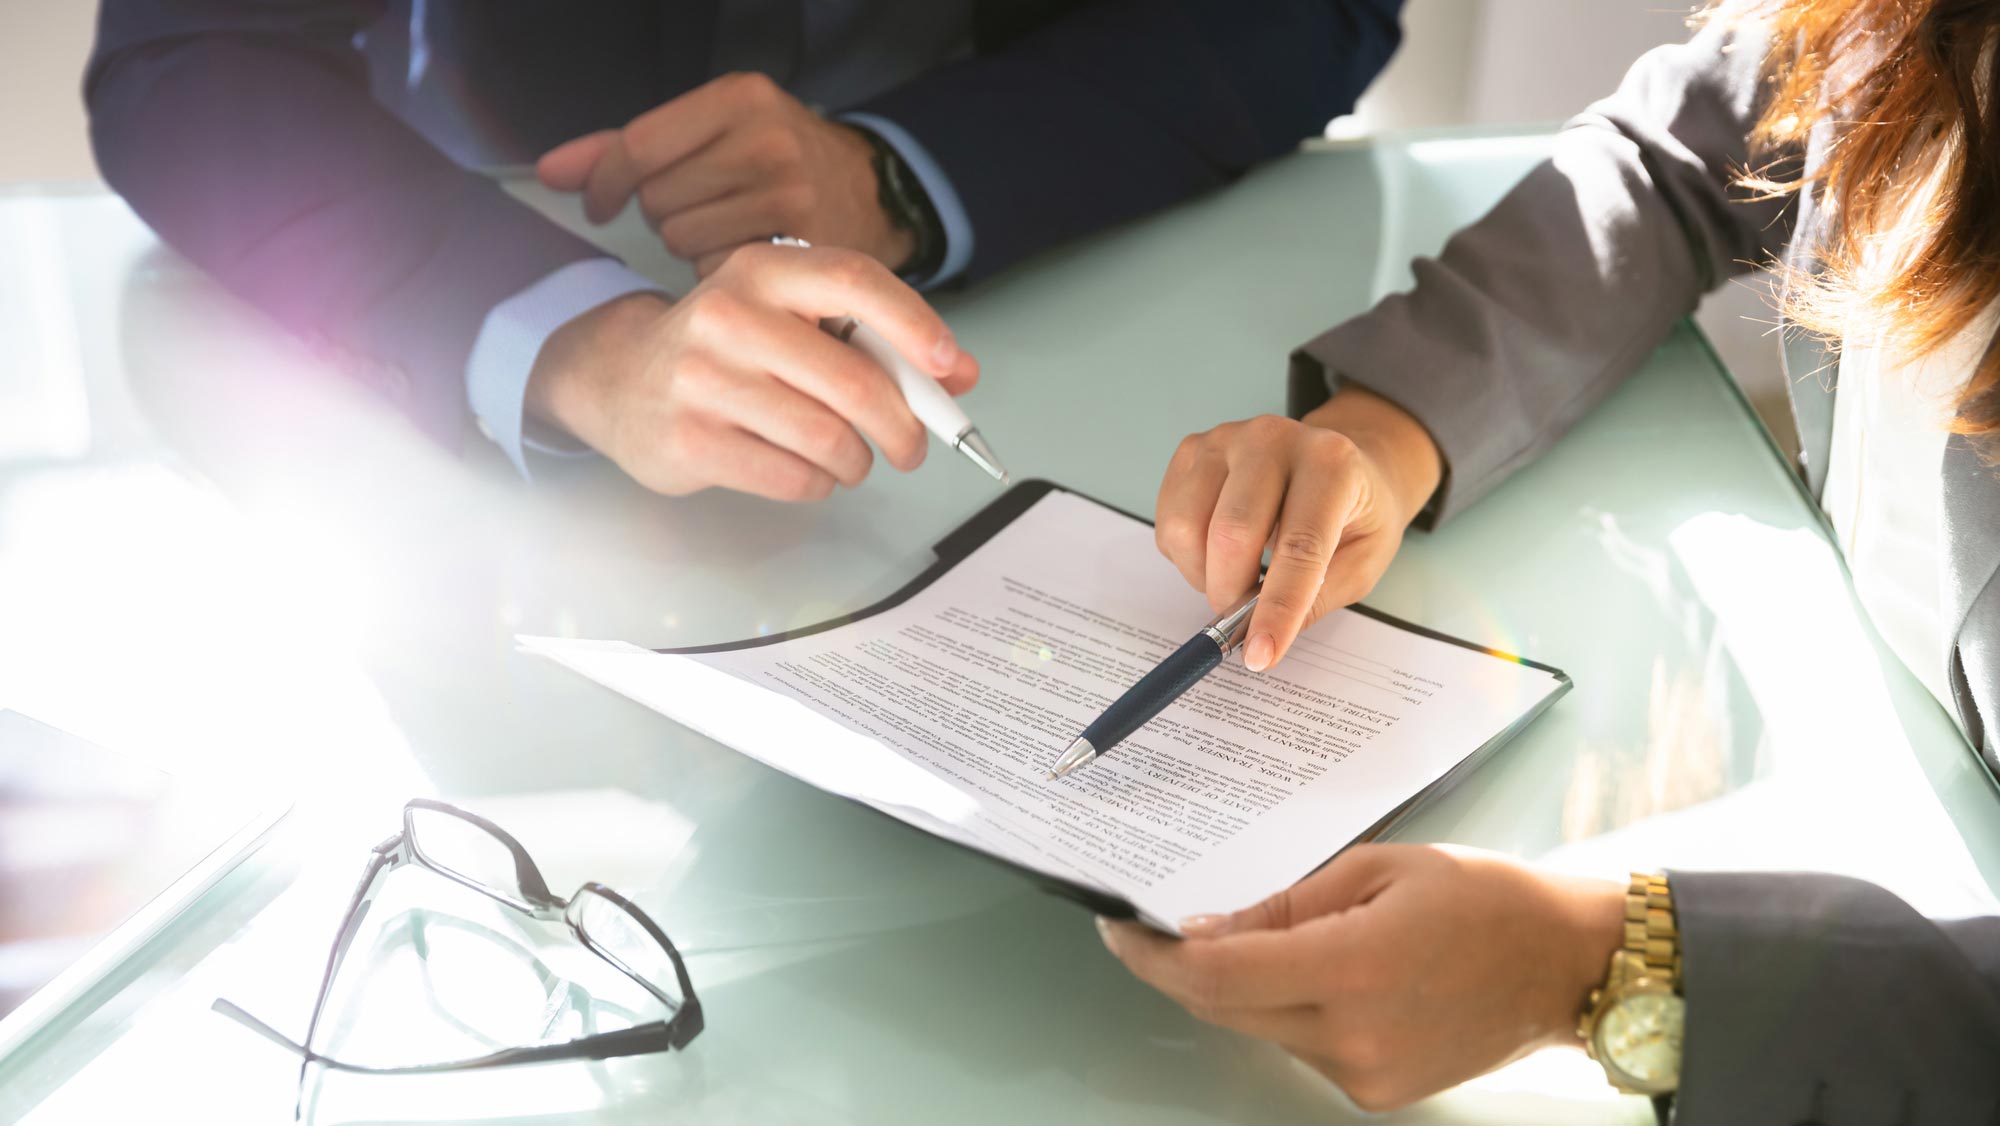 Two people's hands hold pens as they appear to review a document at a table. Someone's glasses also rest on the table.